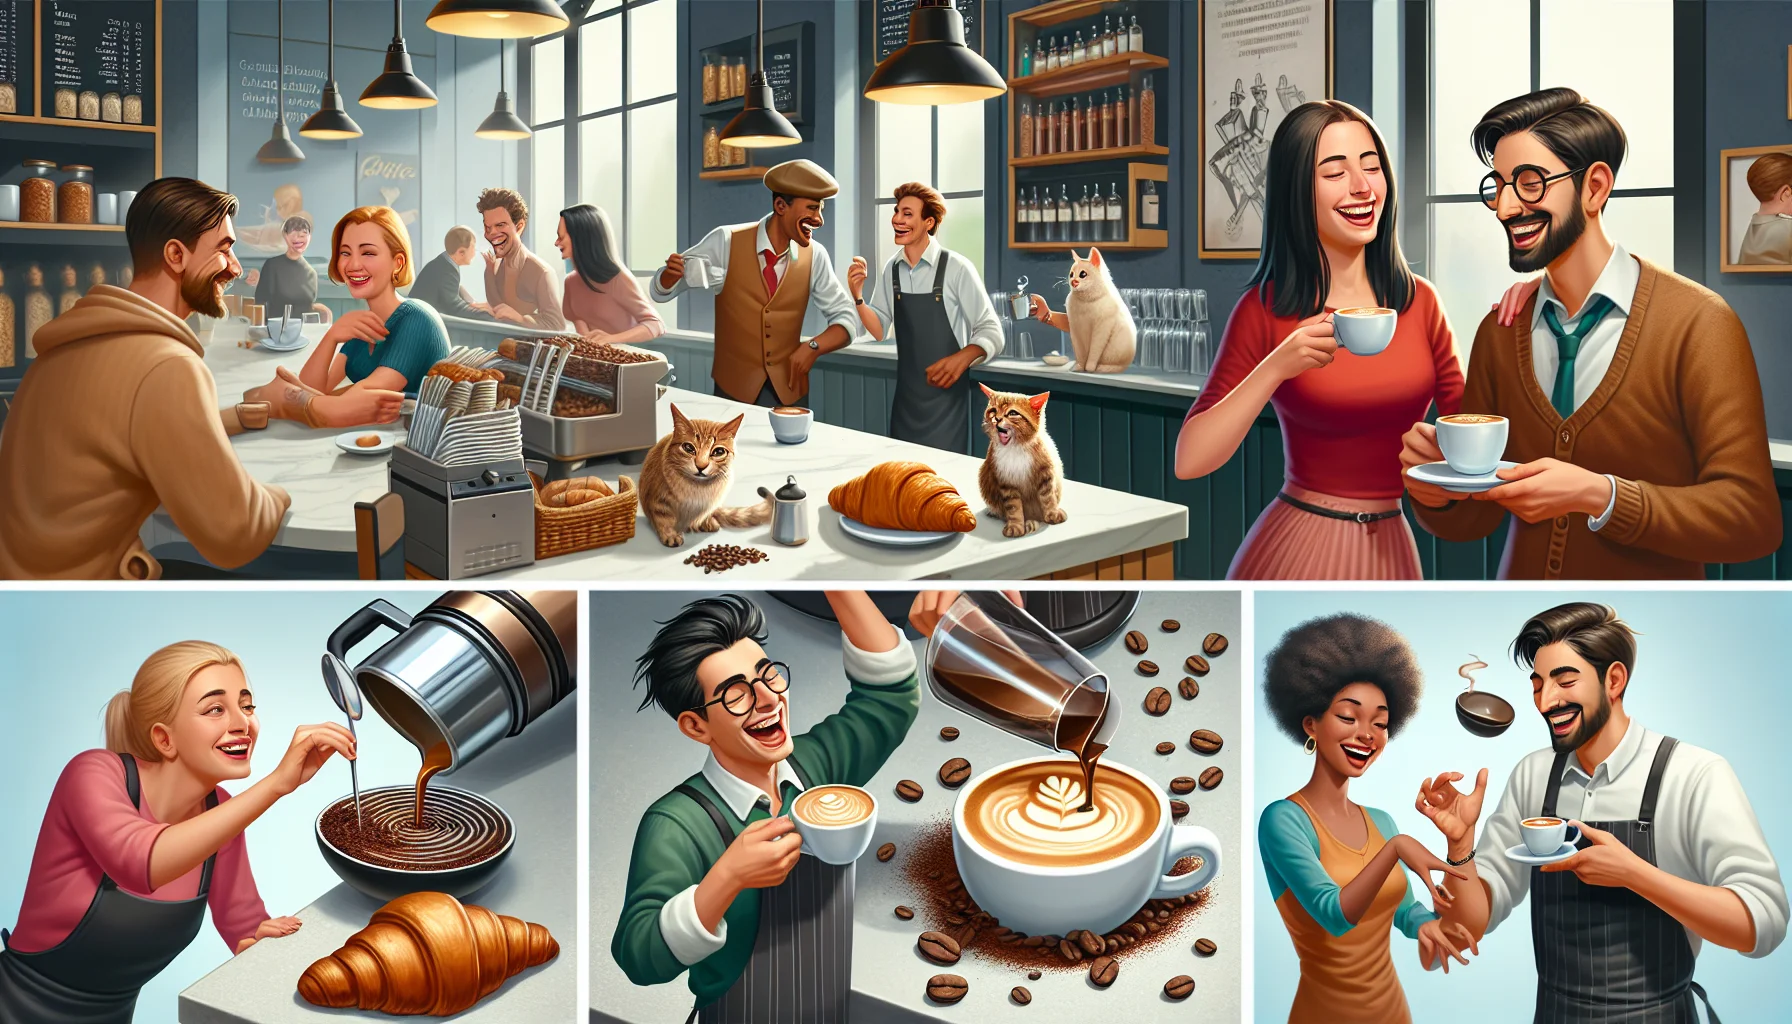 Create a realistic and playful scene set at an upscale and charming espresso bar. It is bustling with people of varying genders and descents, such as a Caucasian woman savouring her latte in the corner, a Middle-Eastern man laughing heartily with his freshly brewed espresso, and a Black female barista confidently crafting the next order. Humor comes alive through a mischievous cat trying to steal a croissant, an accidental coffee spill evolving into a coffee-art creation, and animated coffee beans preparing their own tiny cups of espresso, enticing onlookers to partake in the joy and taste of quality coffee.